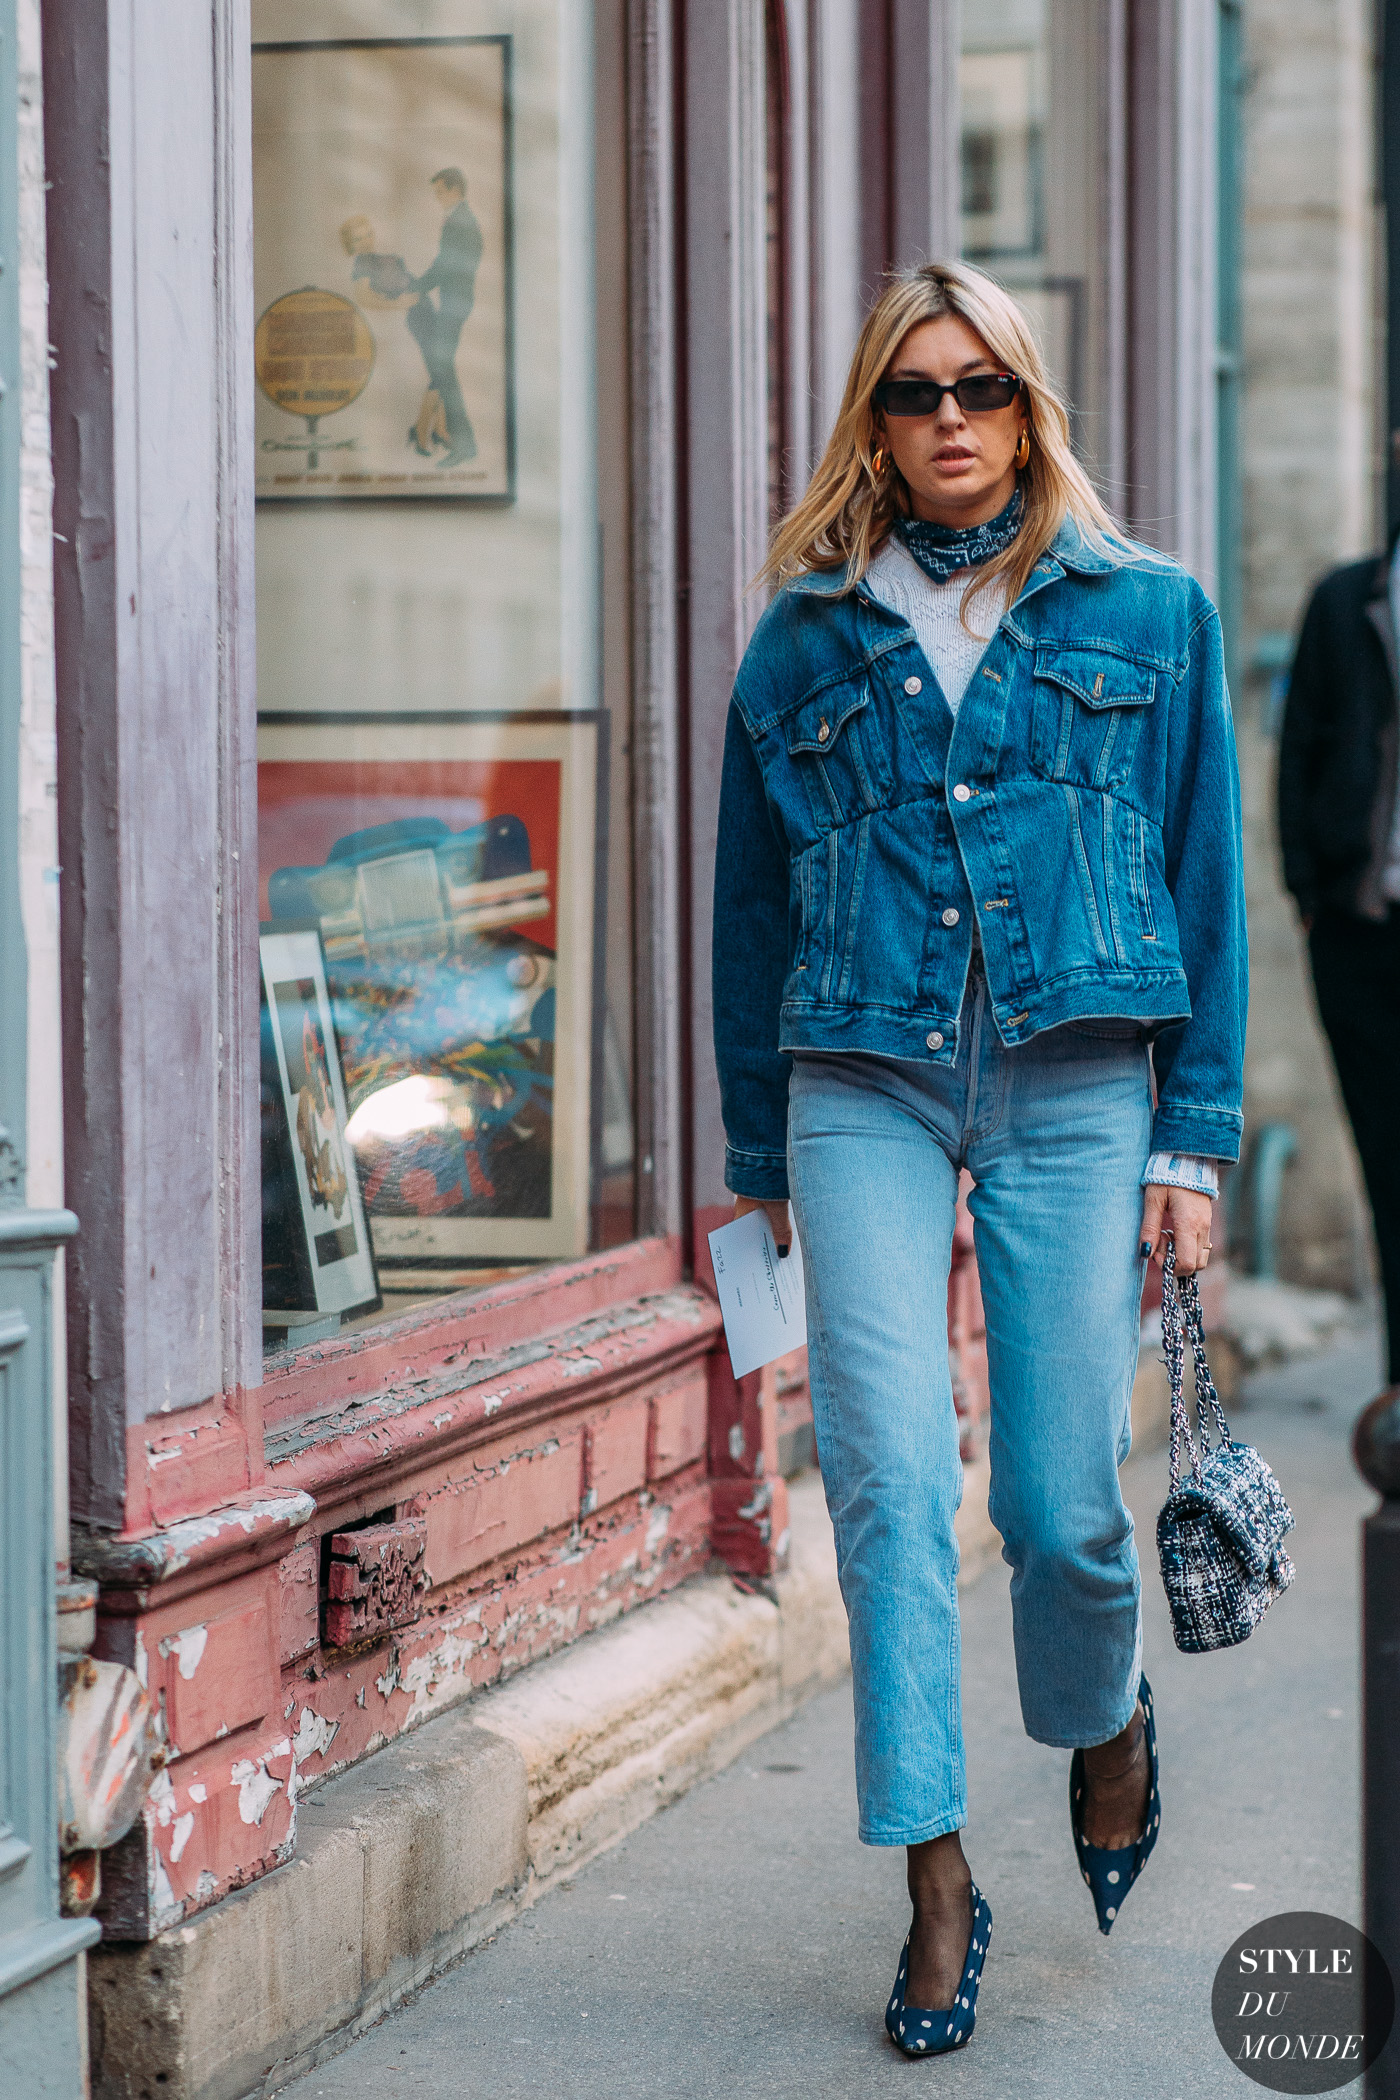 Camille Charriere by STYLEDUMONDE Street Style Fashion Photography FW18 20180303_48A1689